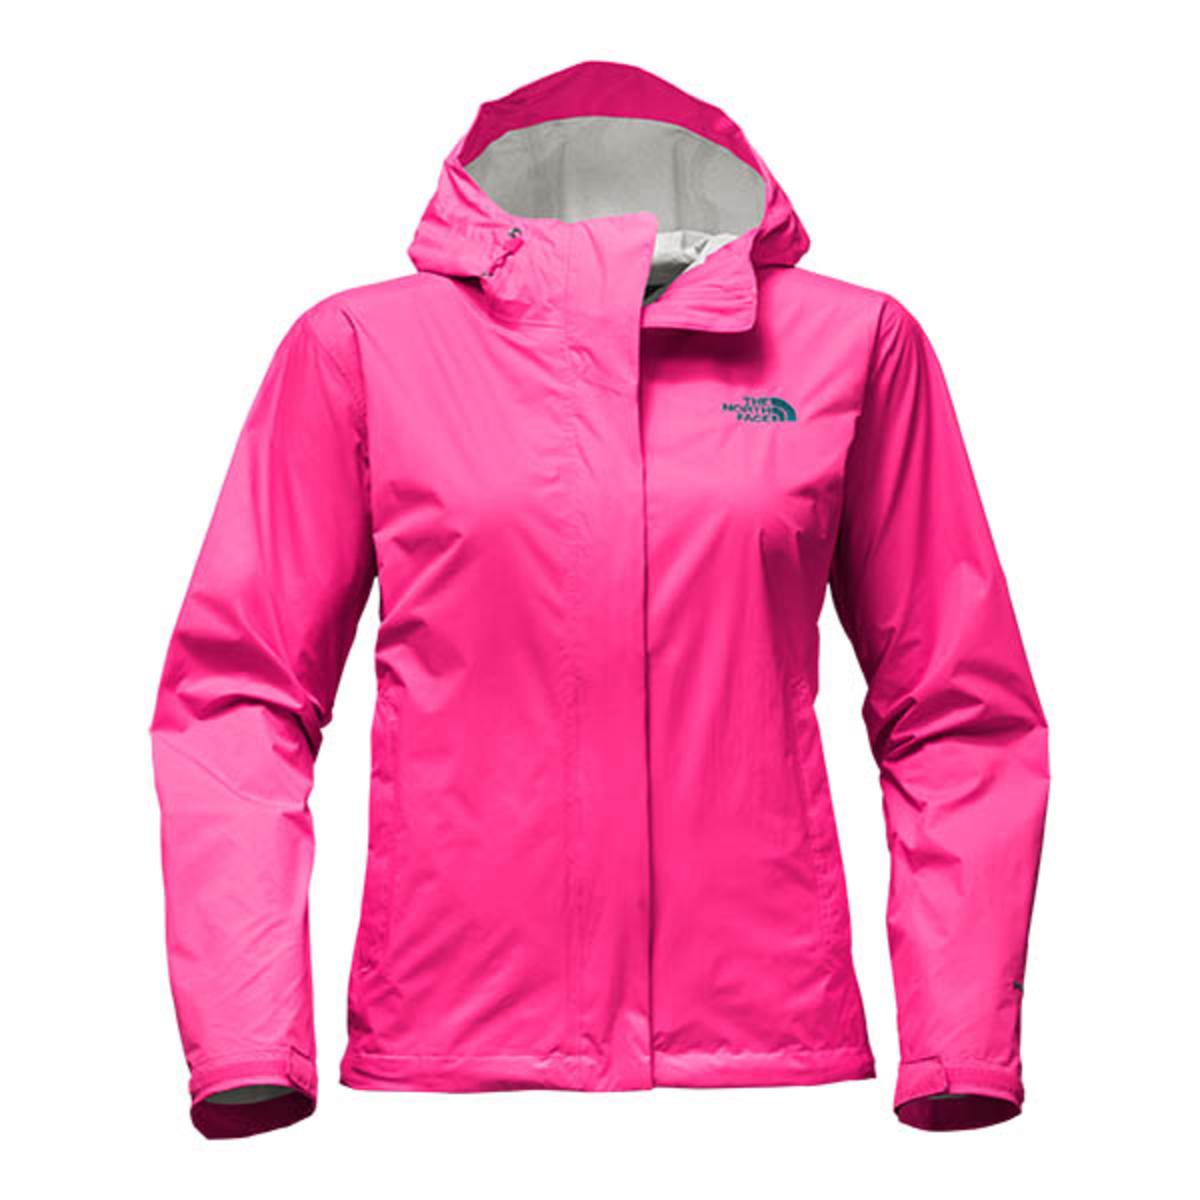 The North Face Women's Venture 2 Jacket – Petticoat Pink | Conquer the ...